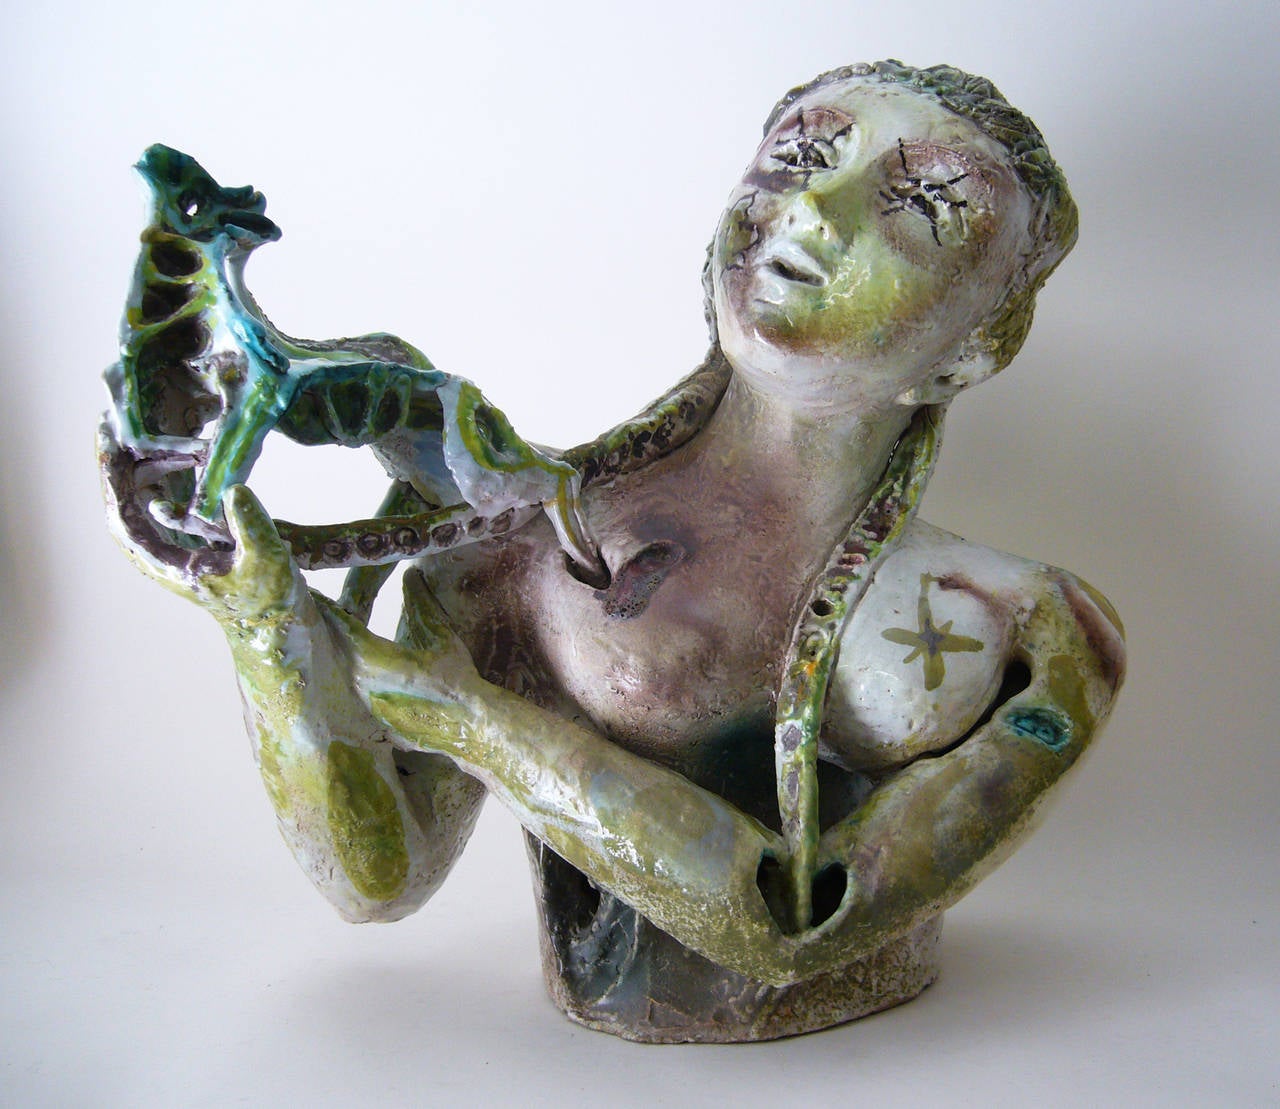 A very rare, Italian modernist hand-painted glazed terra cotta fantasy sculpture created by Alessio Tasca of Italy, circa 1950s. Bust measures 20" in height by 22" wide and is about 10" deep. Signed on verso Tasca, as pictured. In